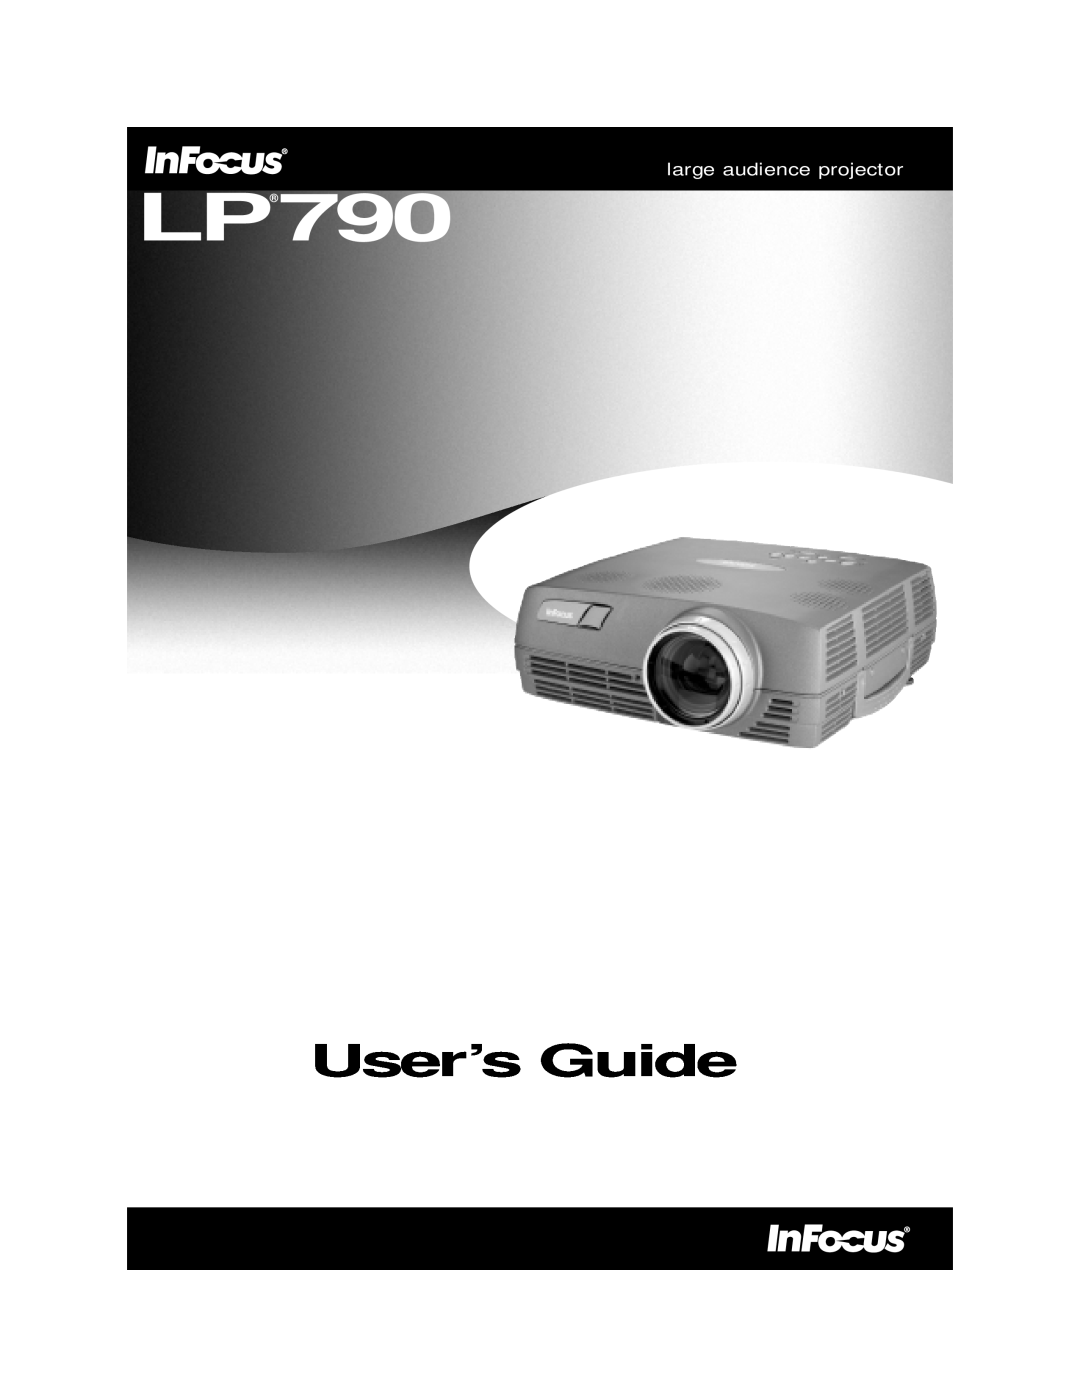 InFocus LP 790 manual User’s Guide, large audience projector 